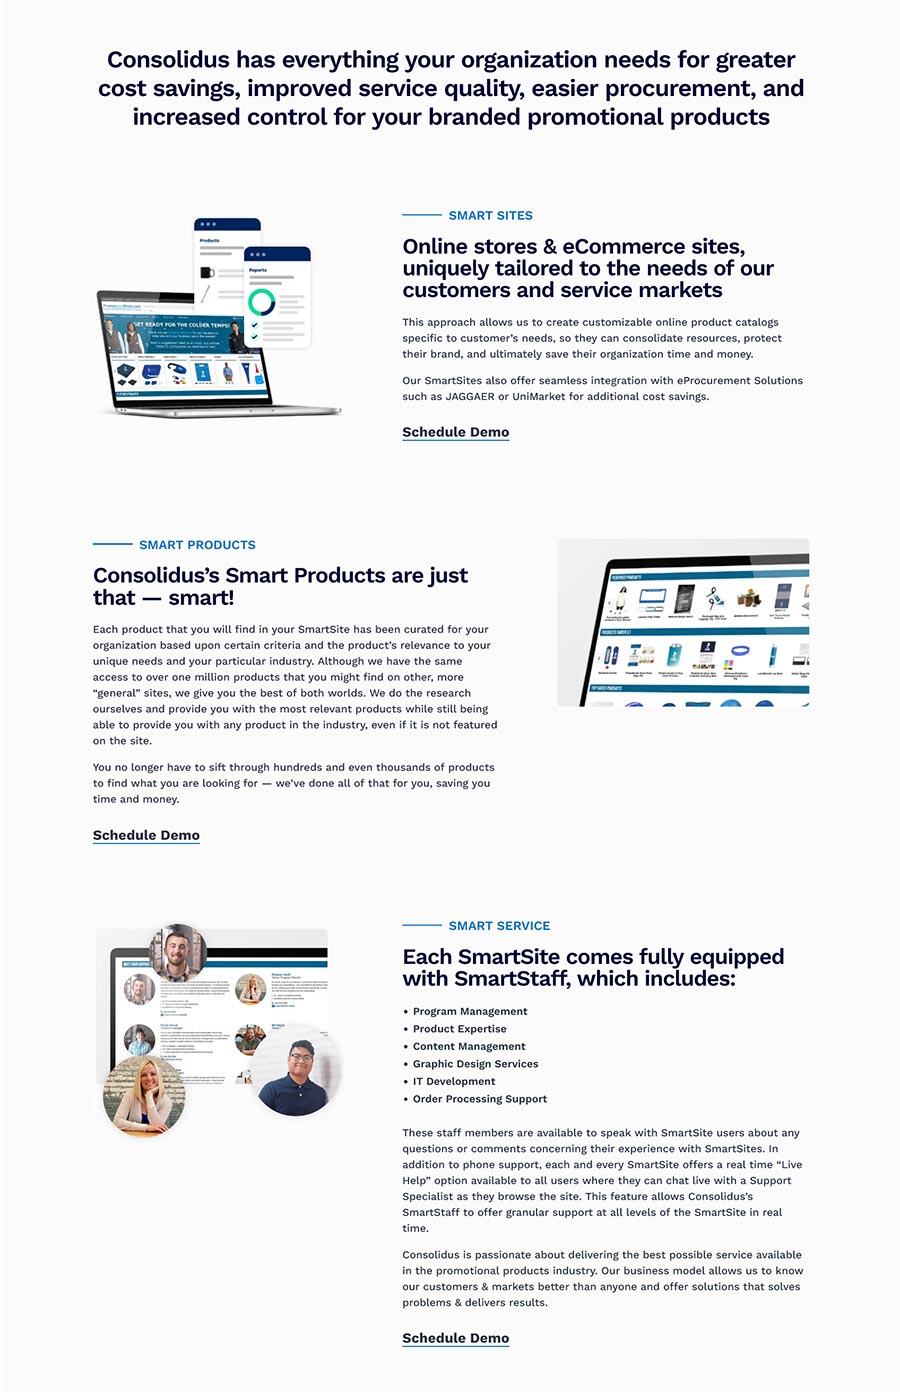 Consolidus web page